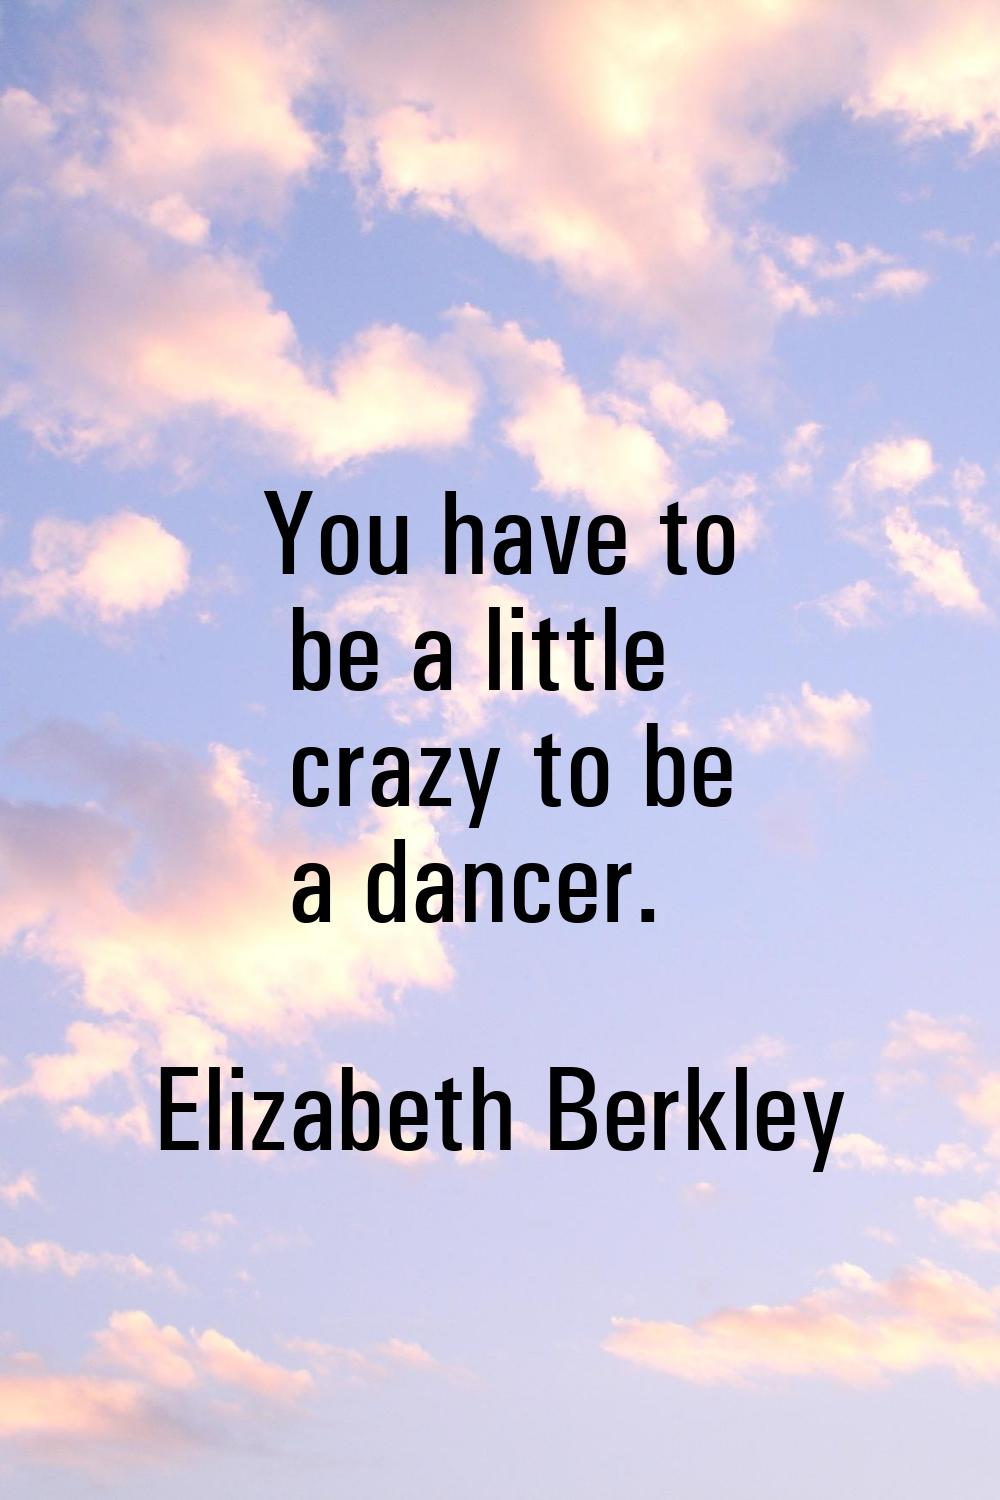 You have to be a little crazy to be a dancer.